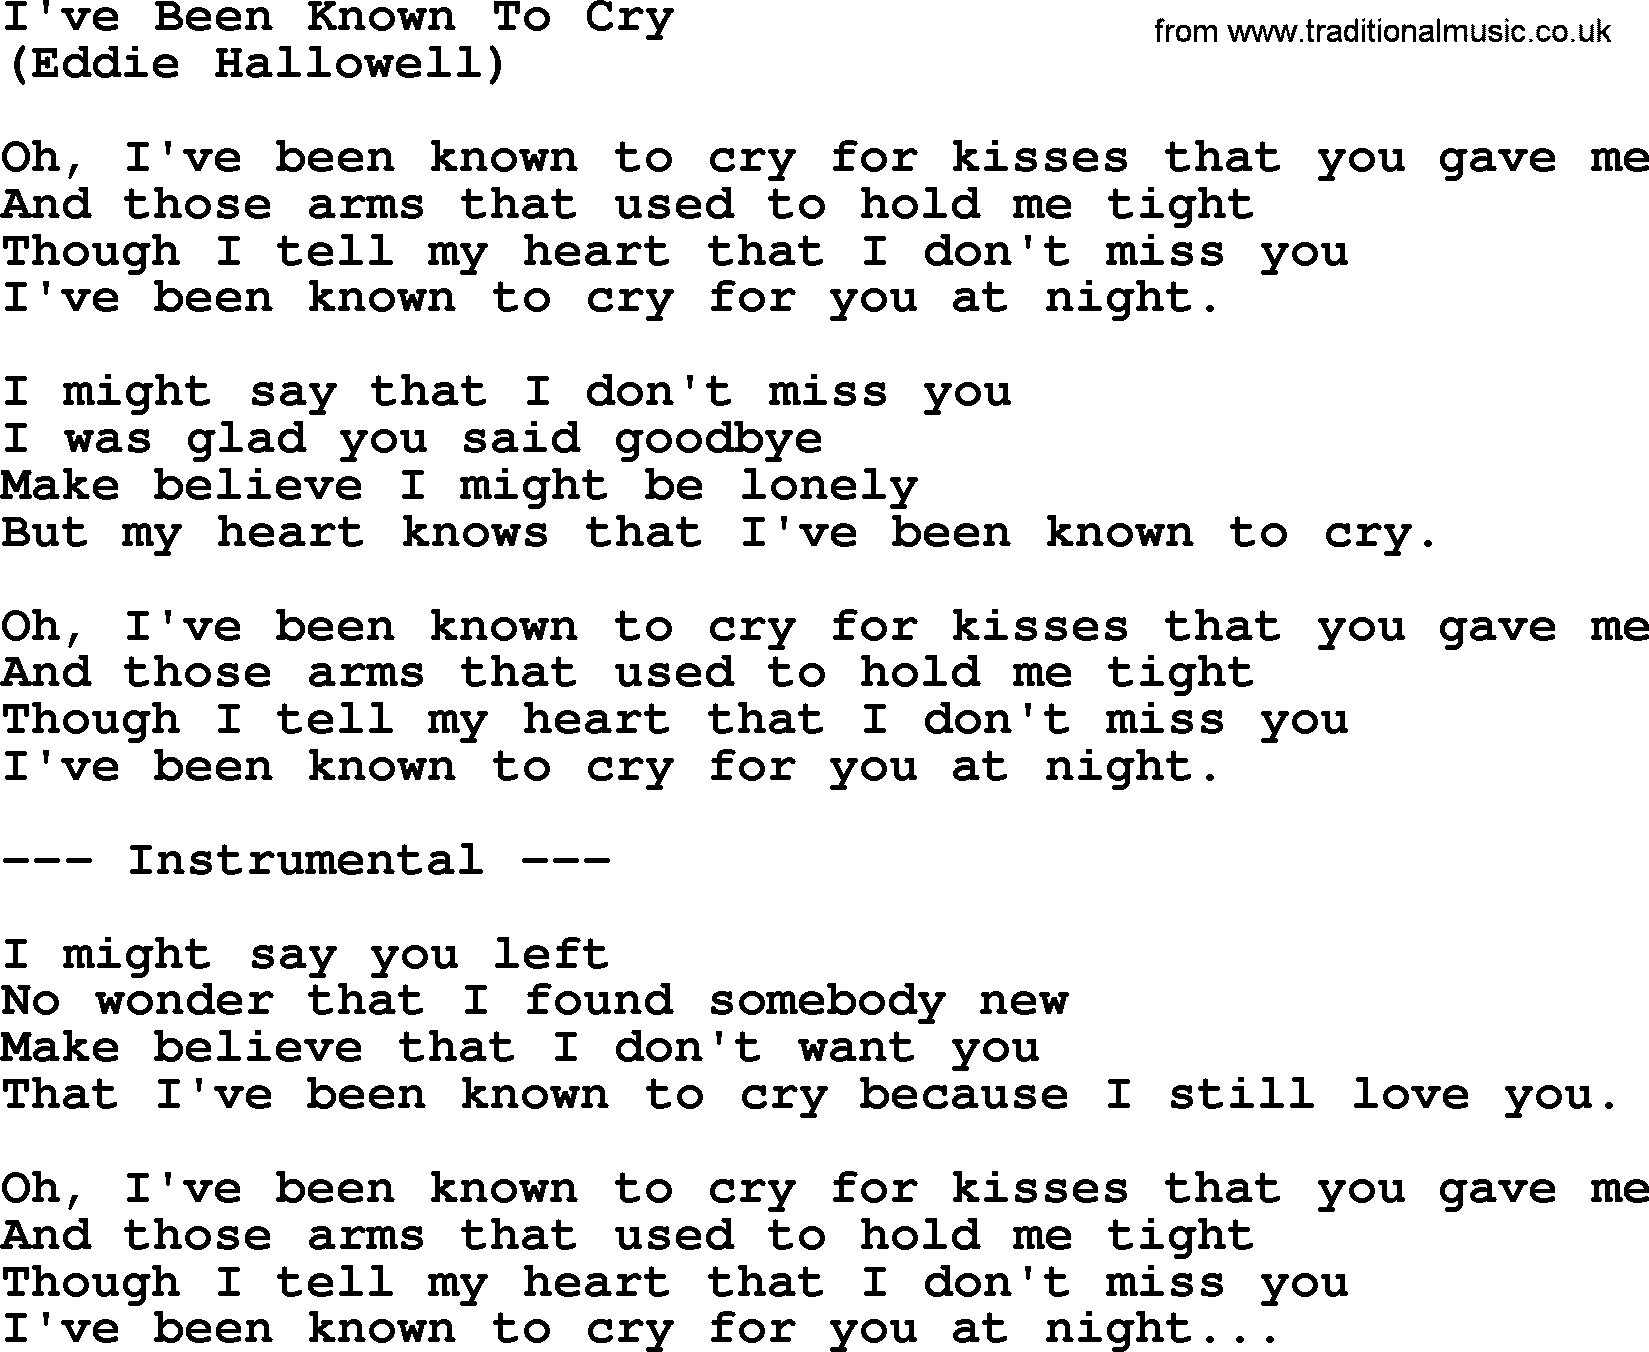 George Jones song: I've Been Known To Cry, lyrics